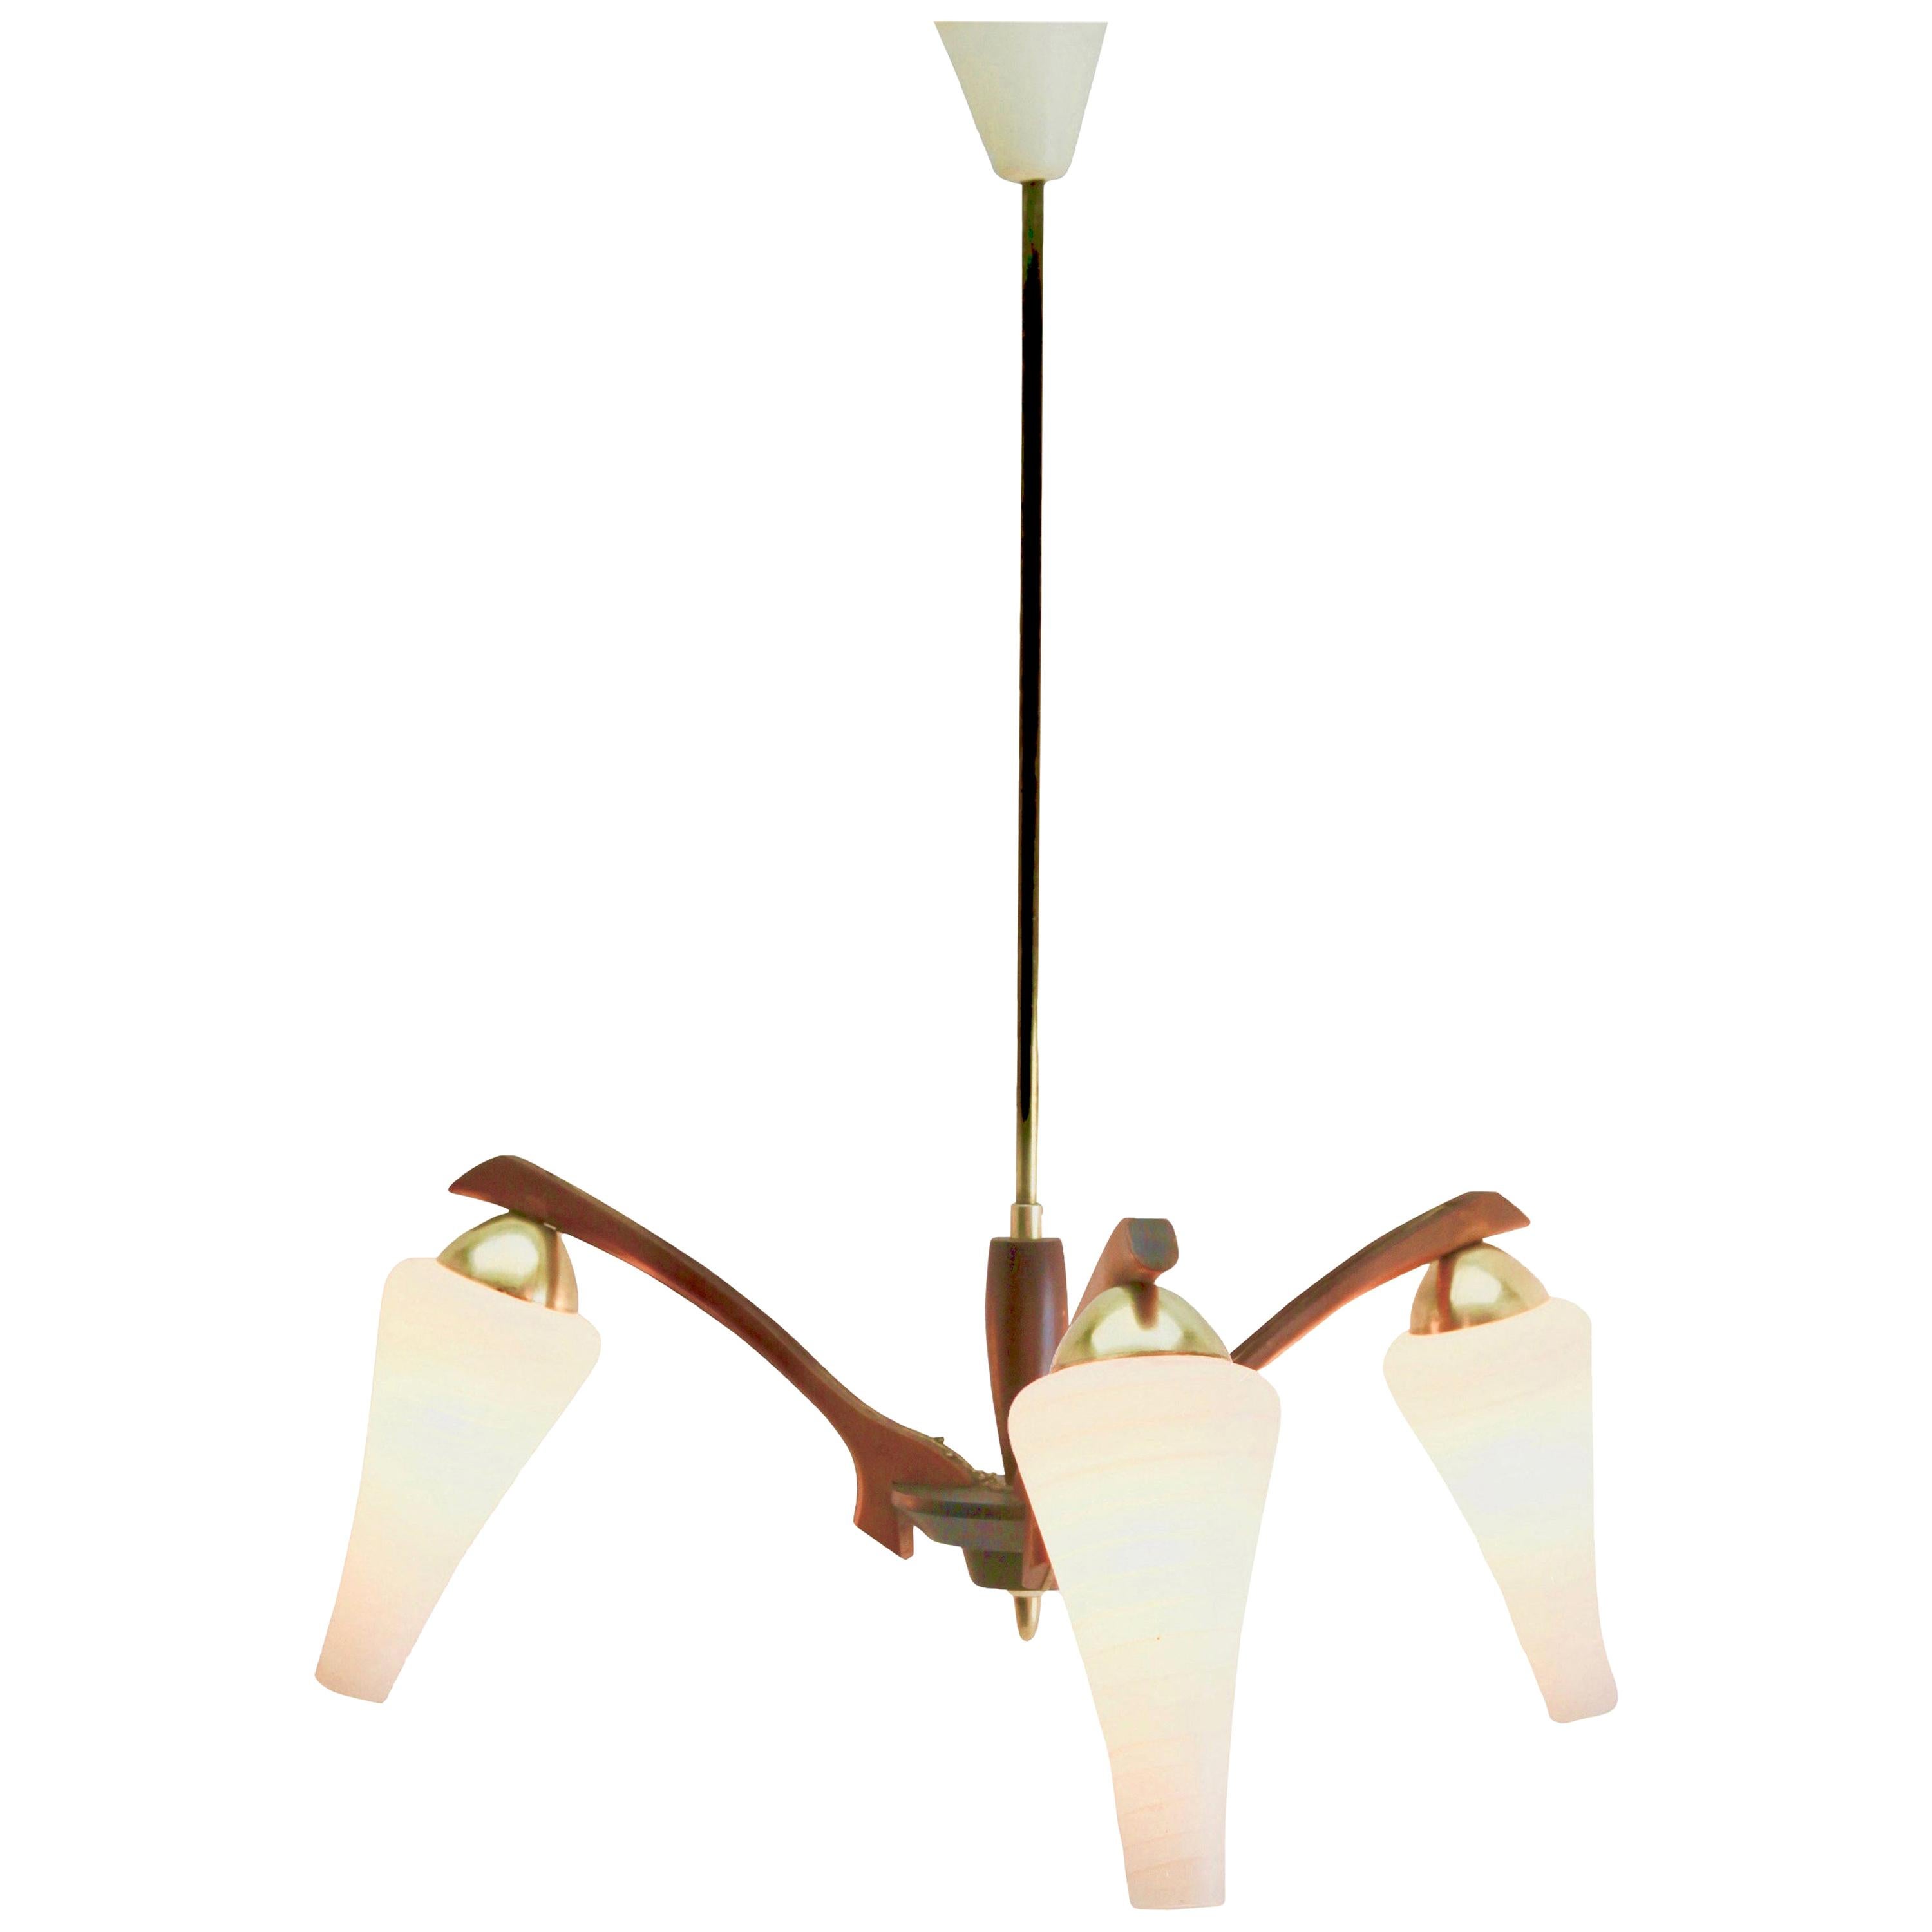 Vintage Chandelier Three Arms in the Style of Stilnovo, Italian, 1960s For Sale